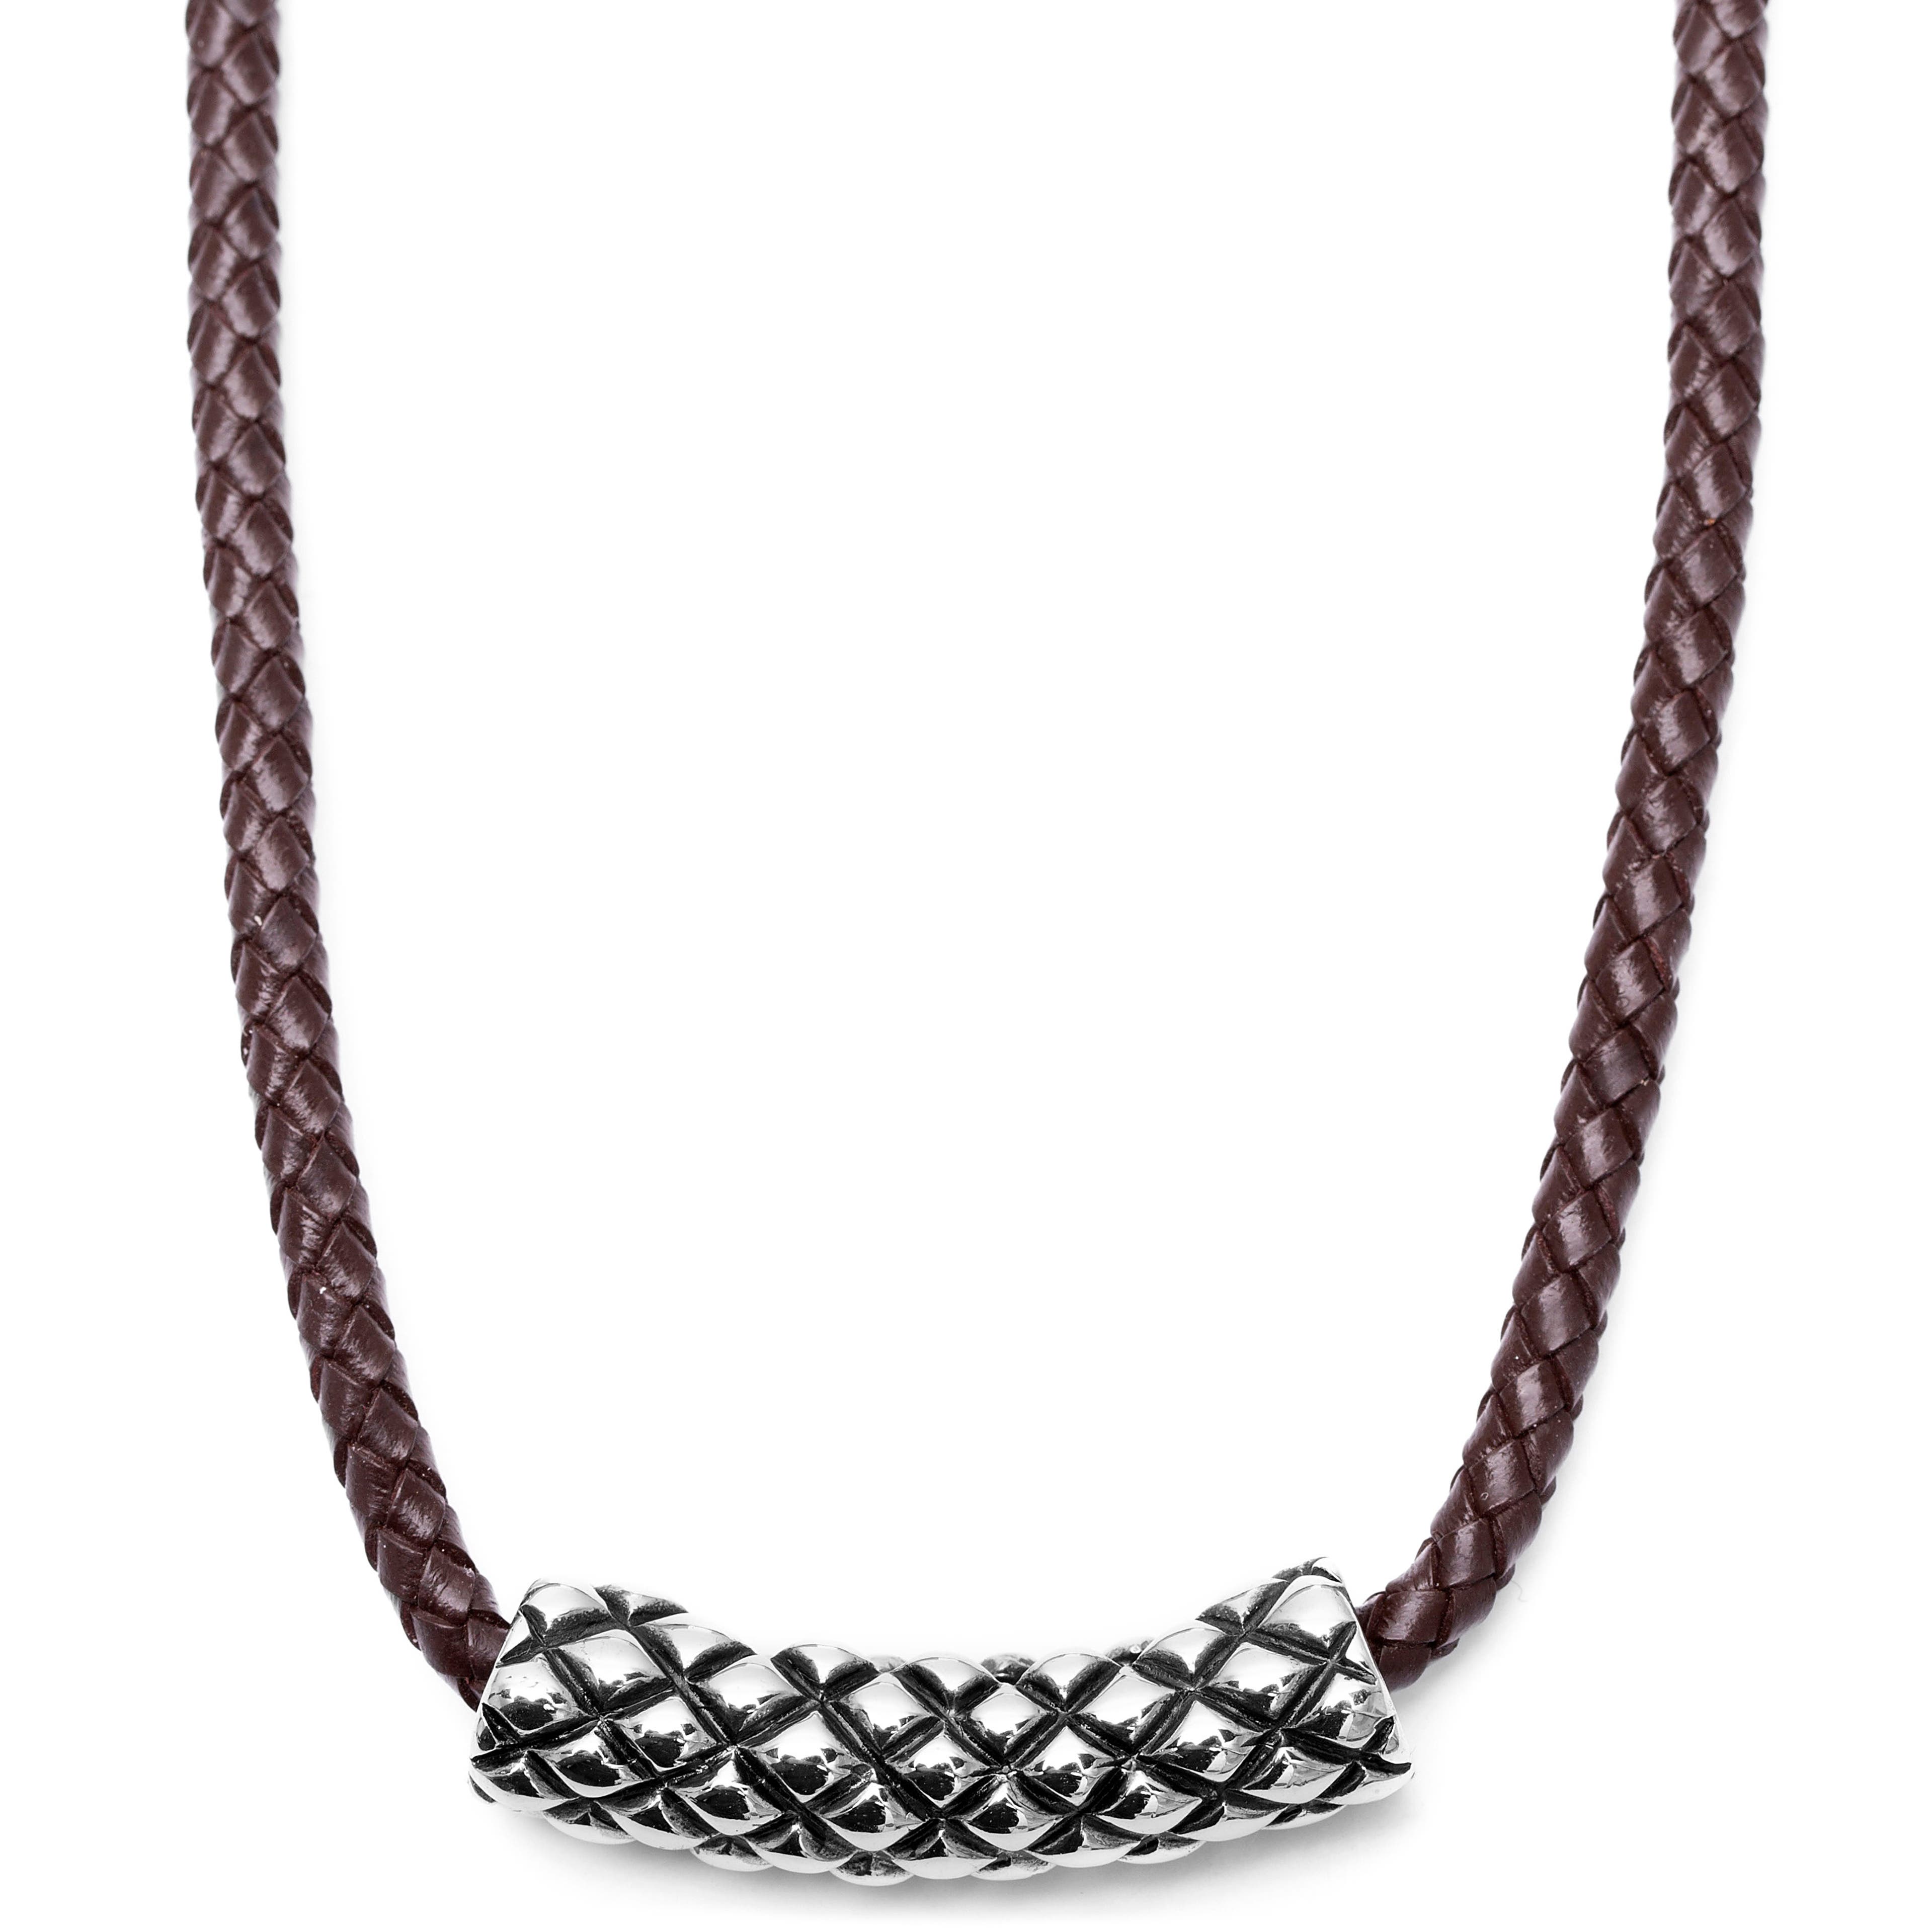 Criss Cross Brown Leather Necklace